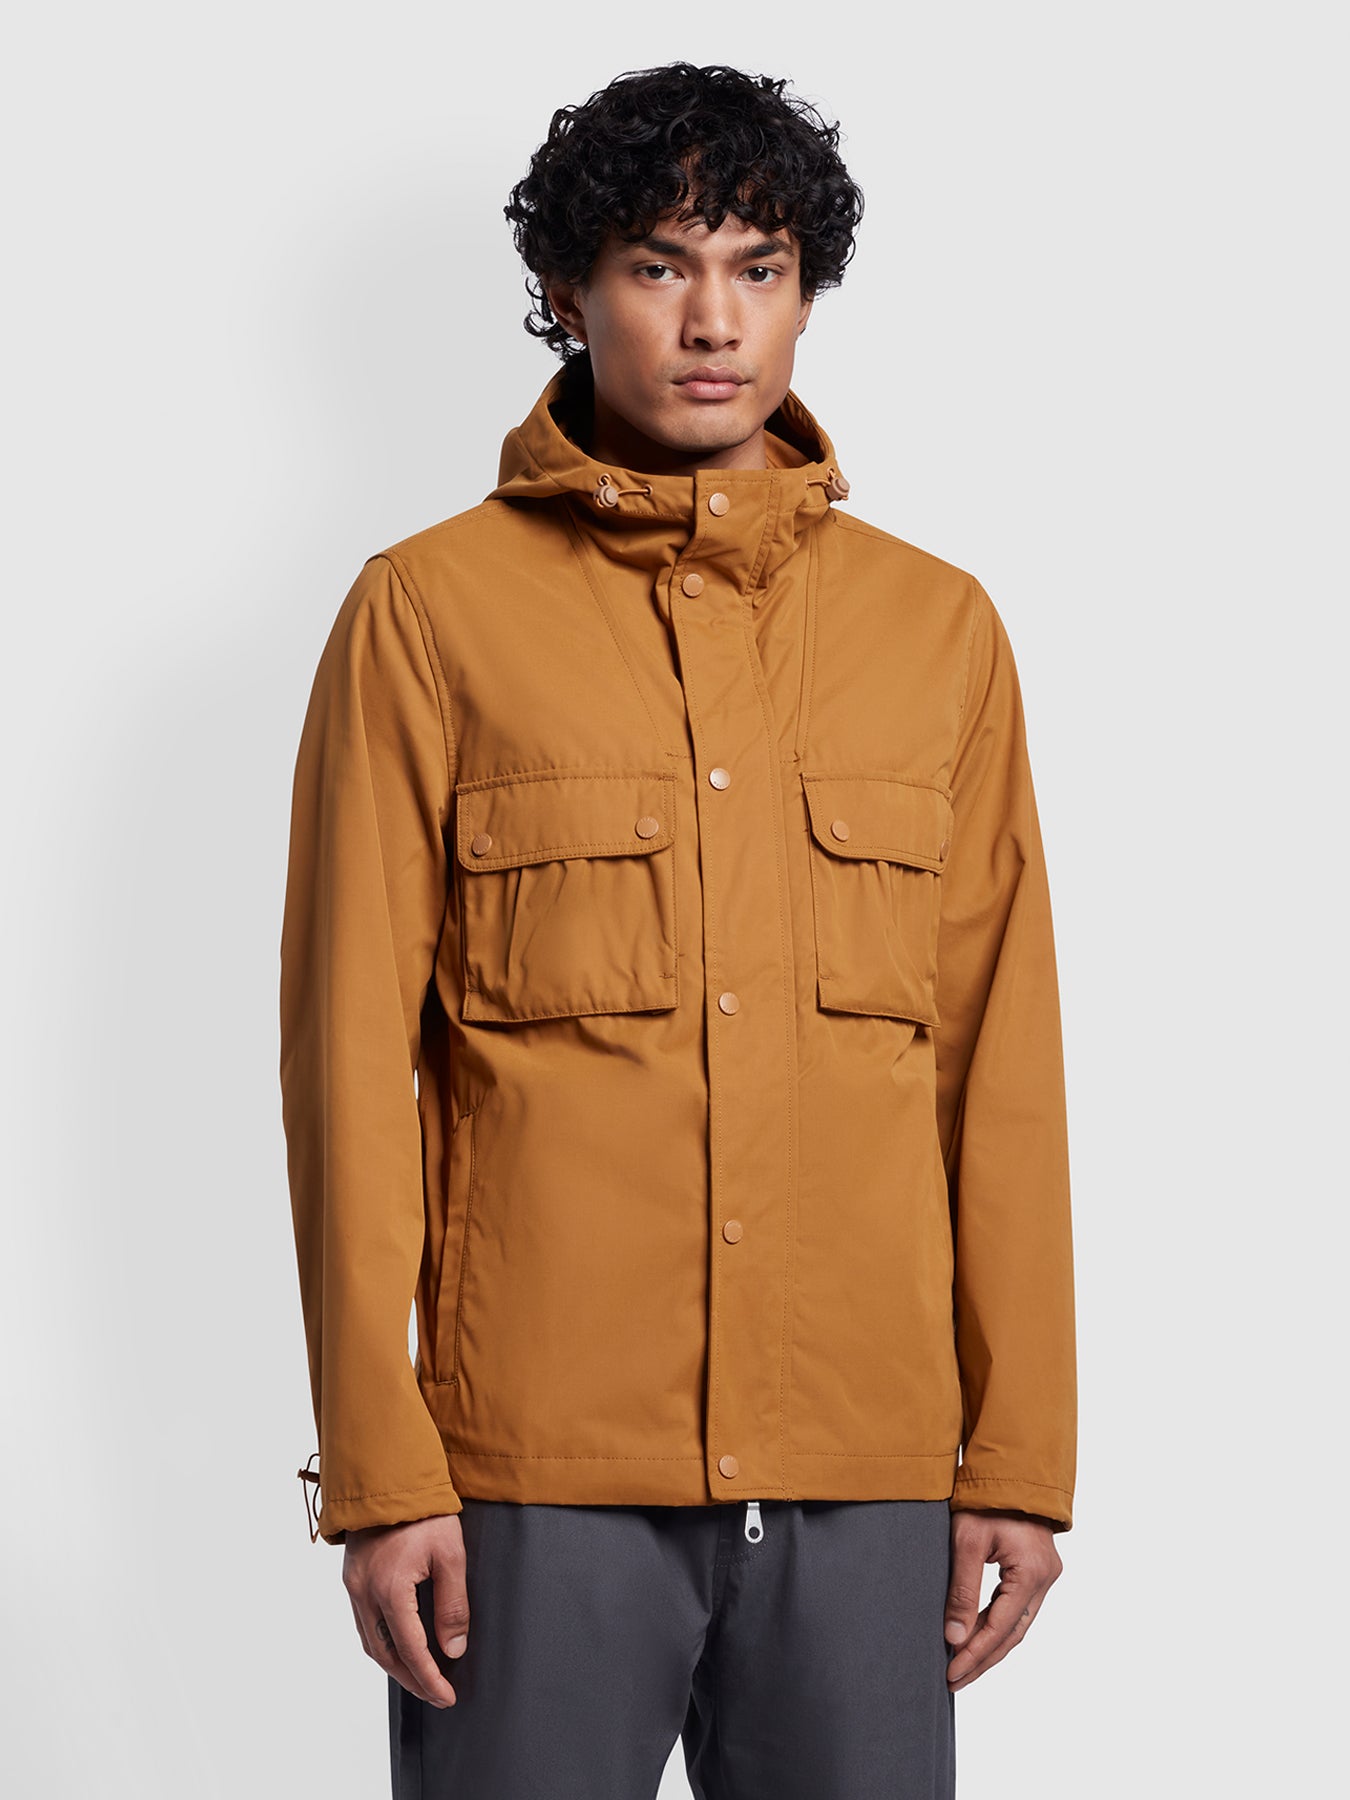 View Jay Regular Fit Hooded Parka Jacket In Rich Tobacco information